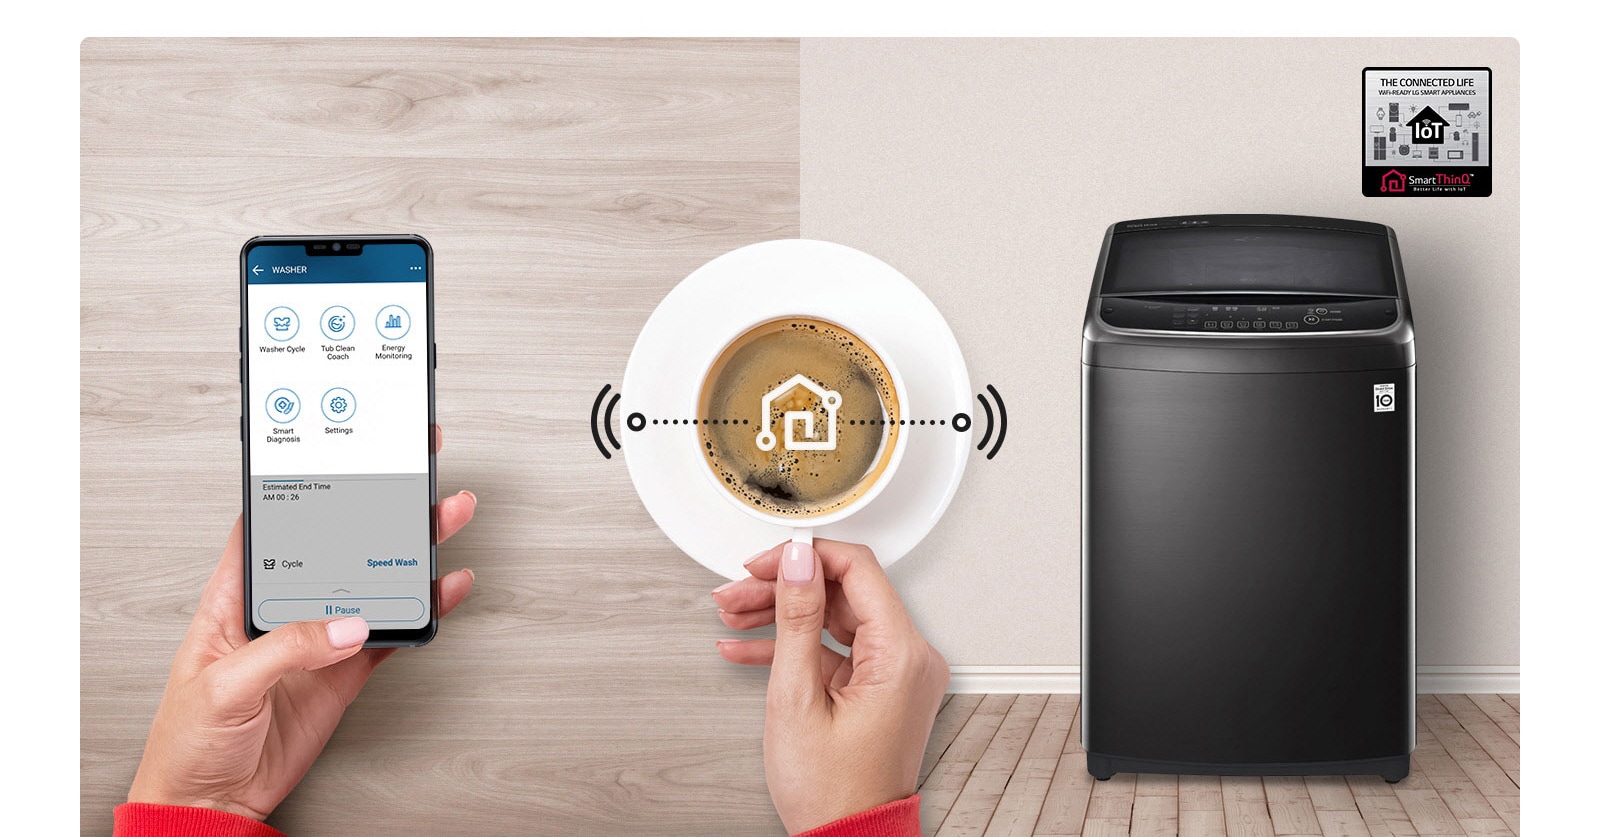 Smart Laundry with Wi-Fi3